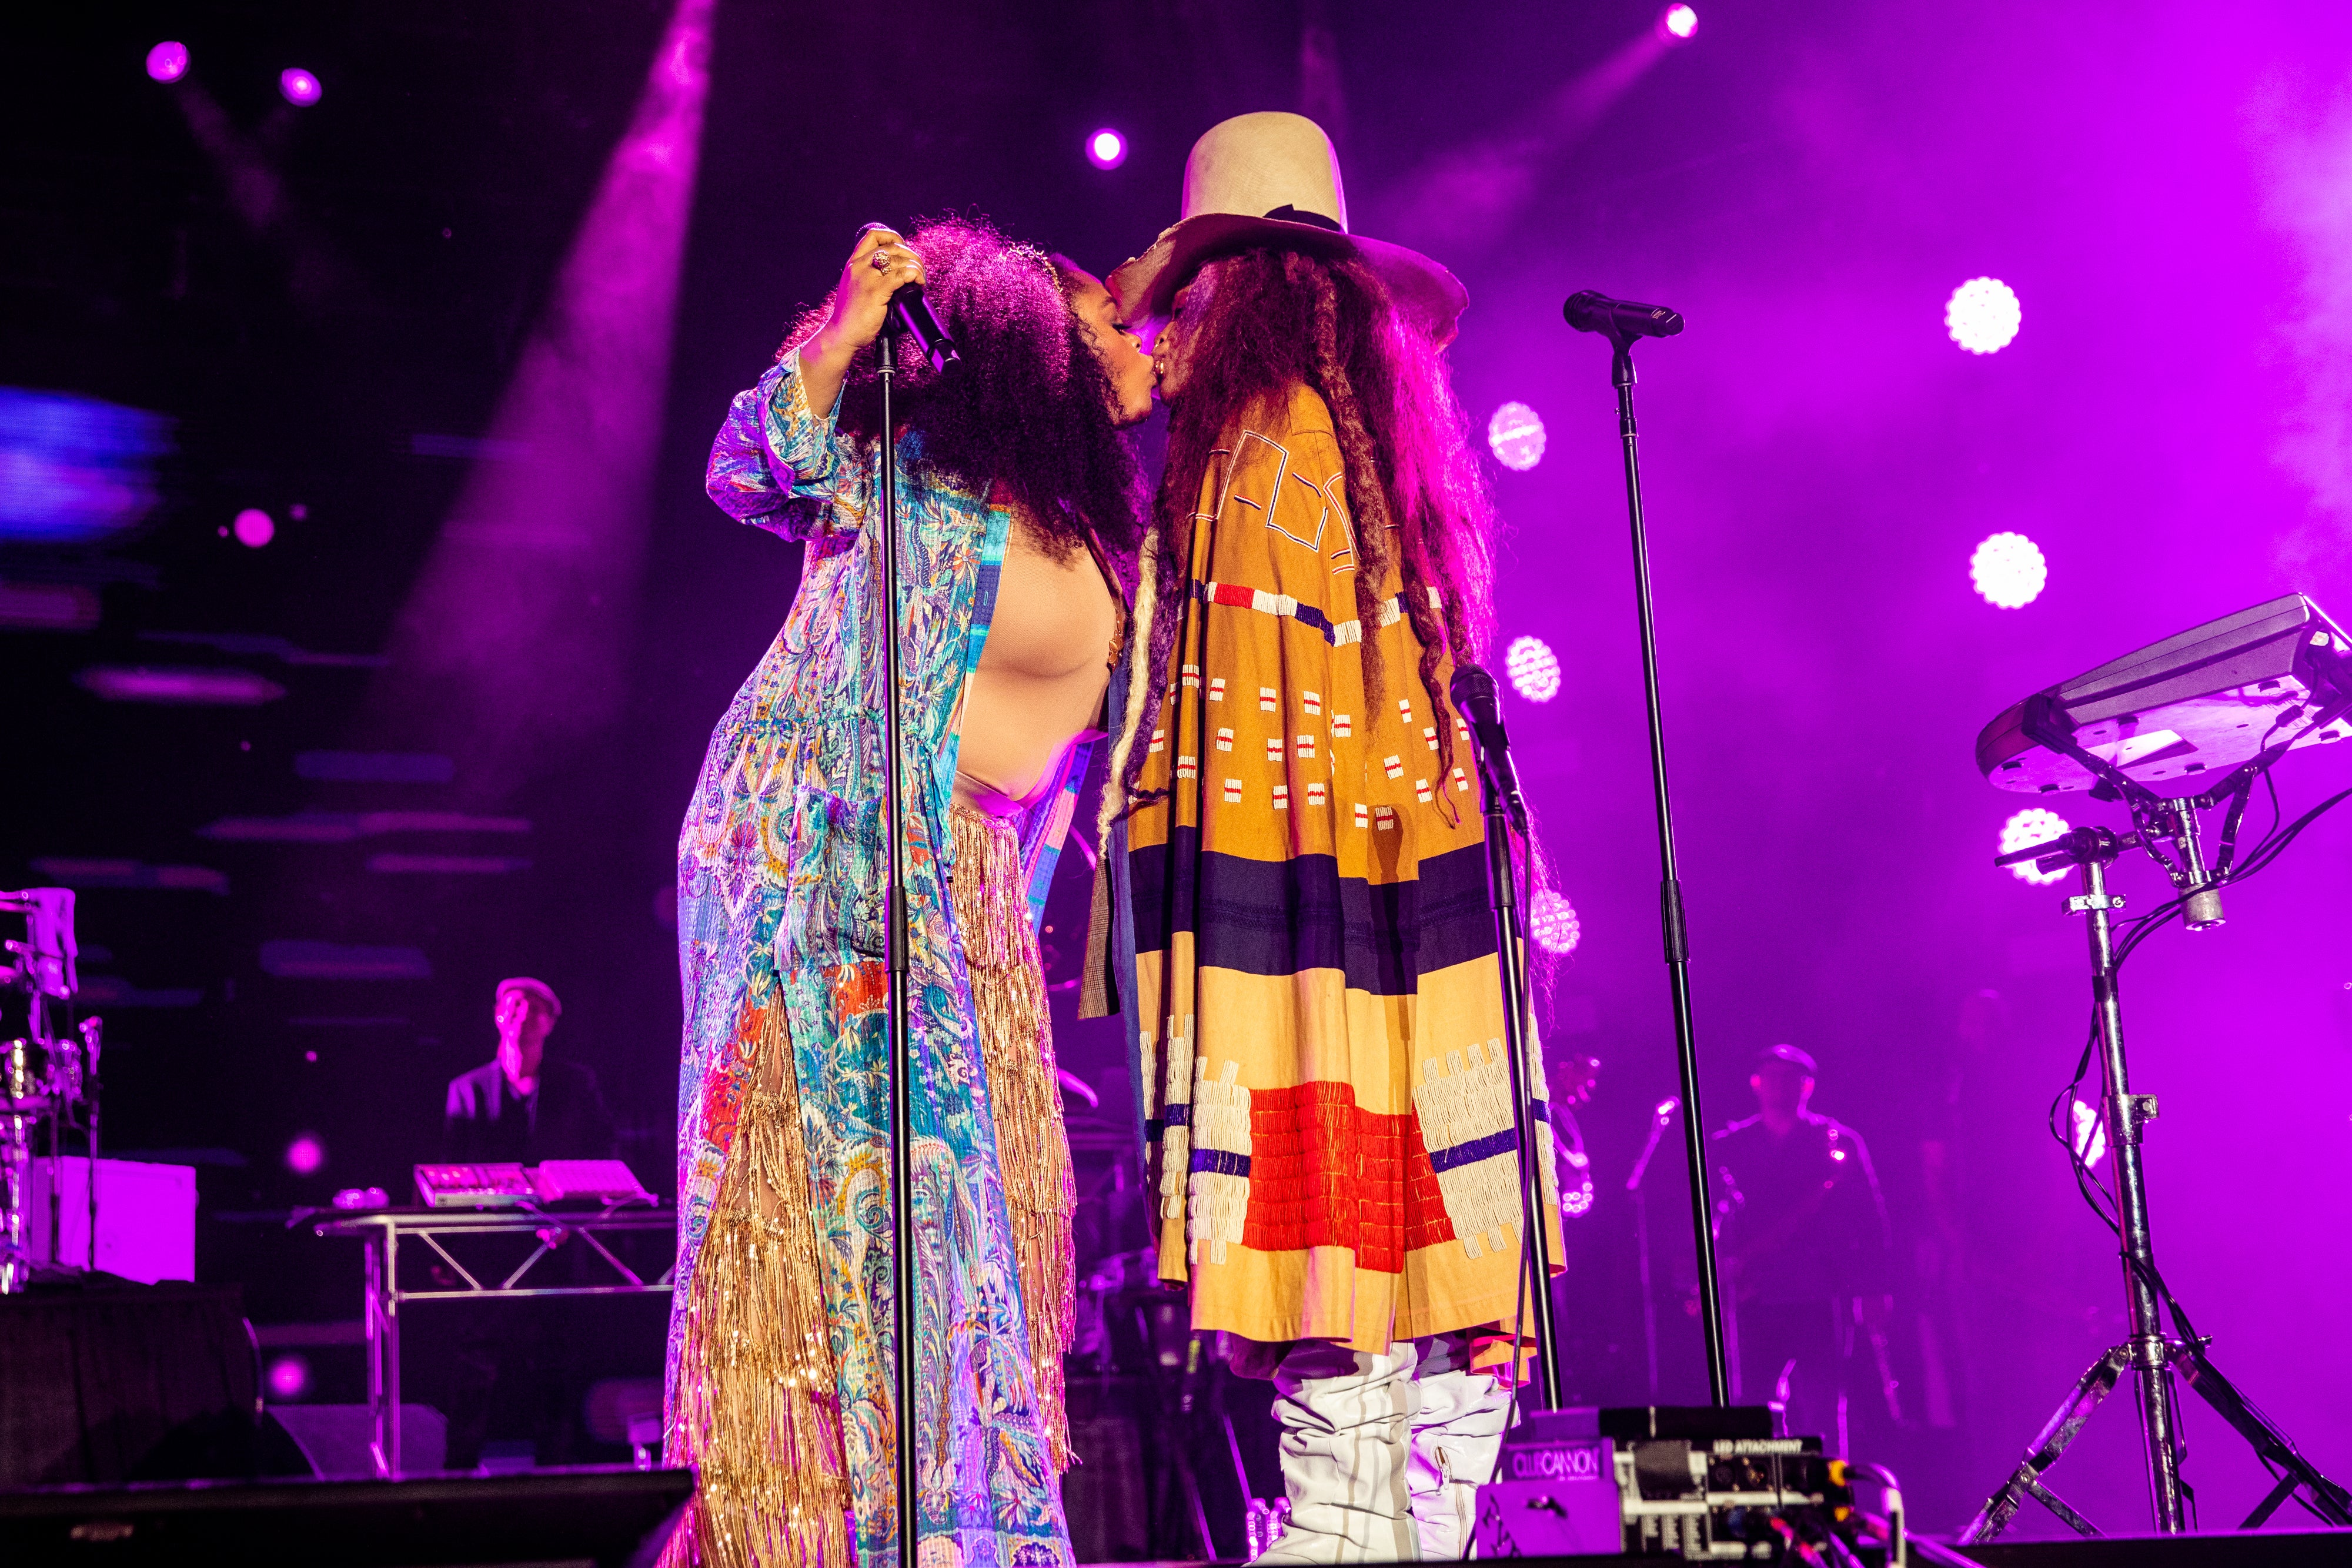 On And On! Erykah Badu and Jill Scott’s Style Game Crushed The Essence Fest Stage on Day 1
